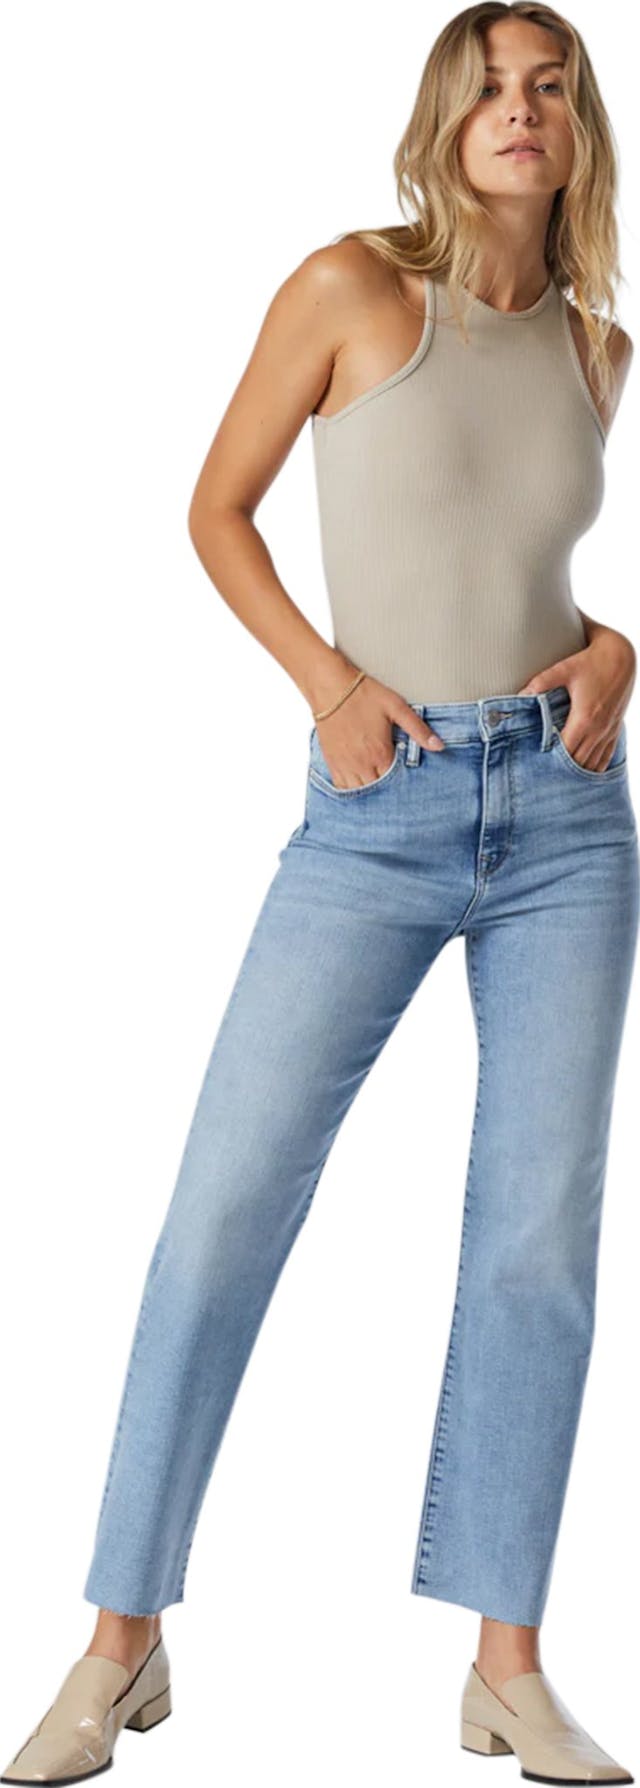 Product image for Barcelona Wide Leg Jeans - Women's